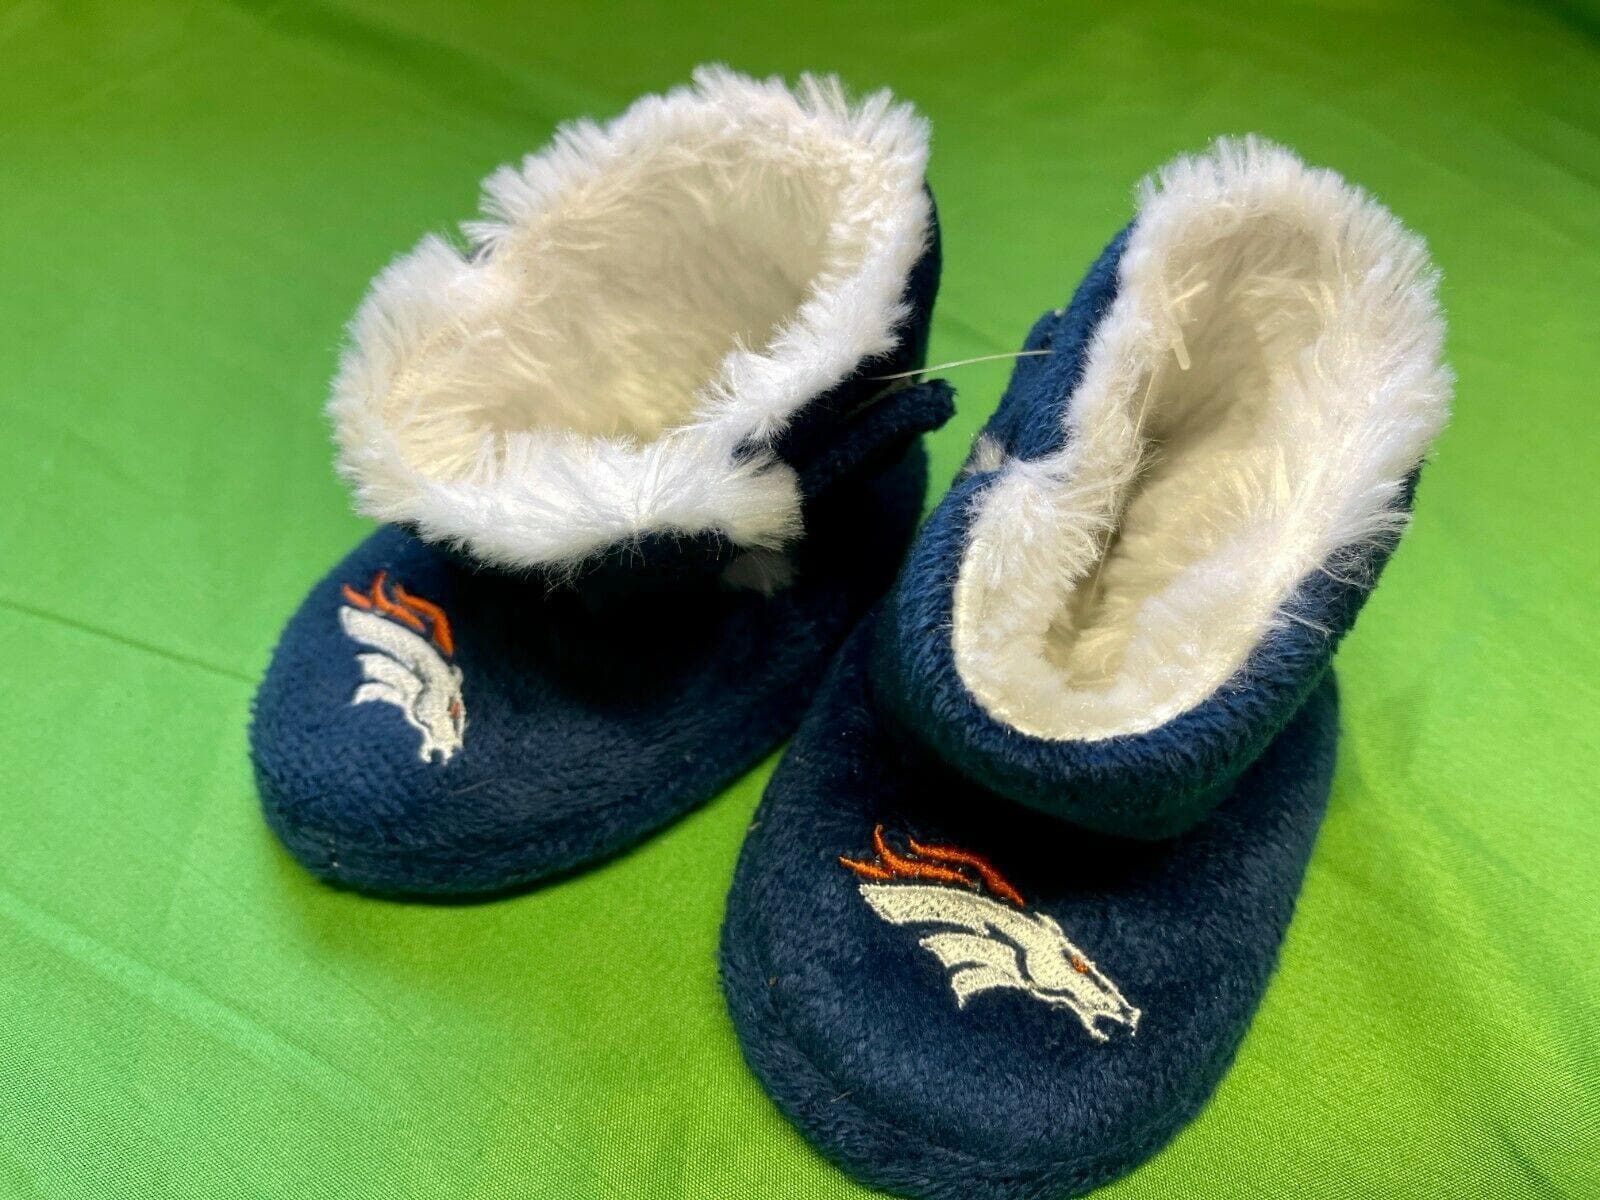 NFL Denver Broncos Baby Slippers-Booties XL (9-12 months)